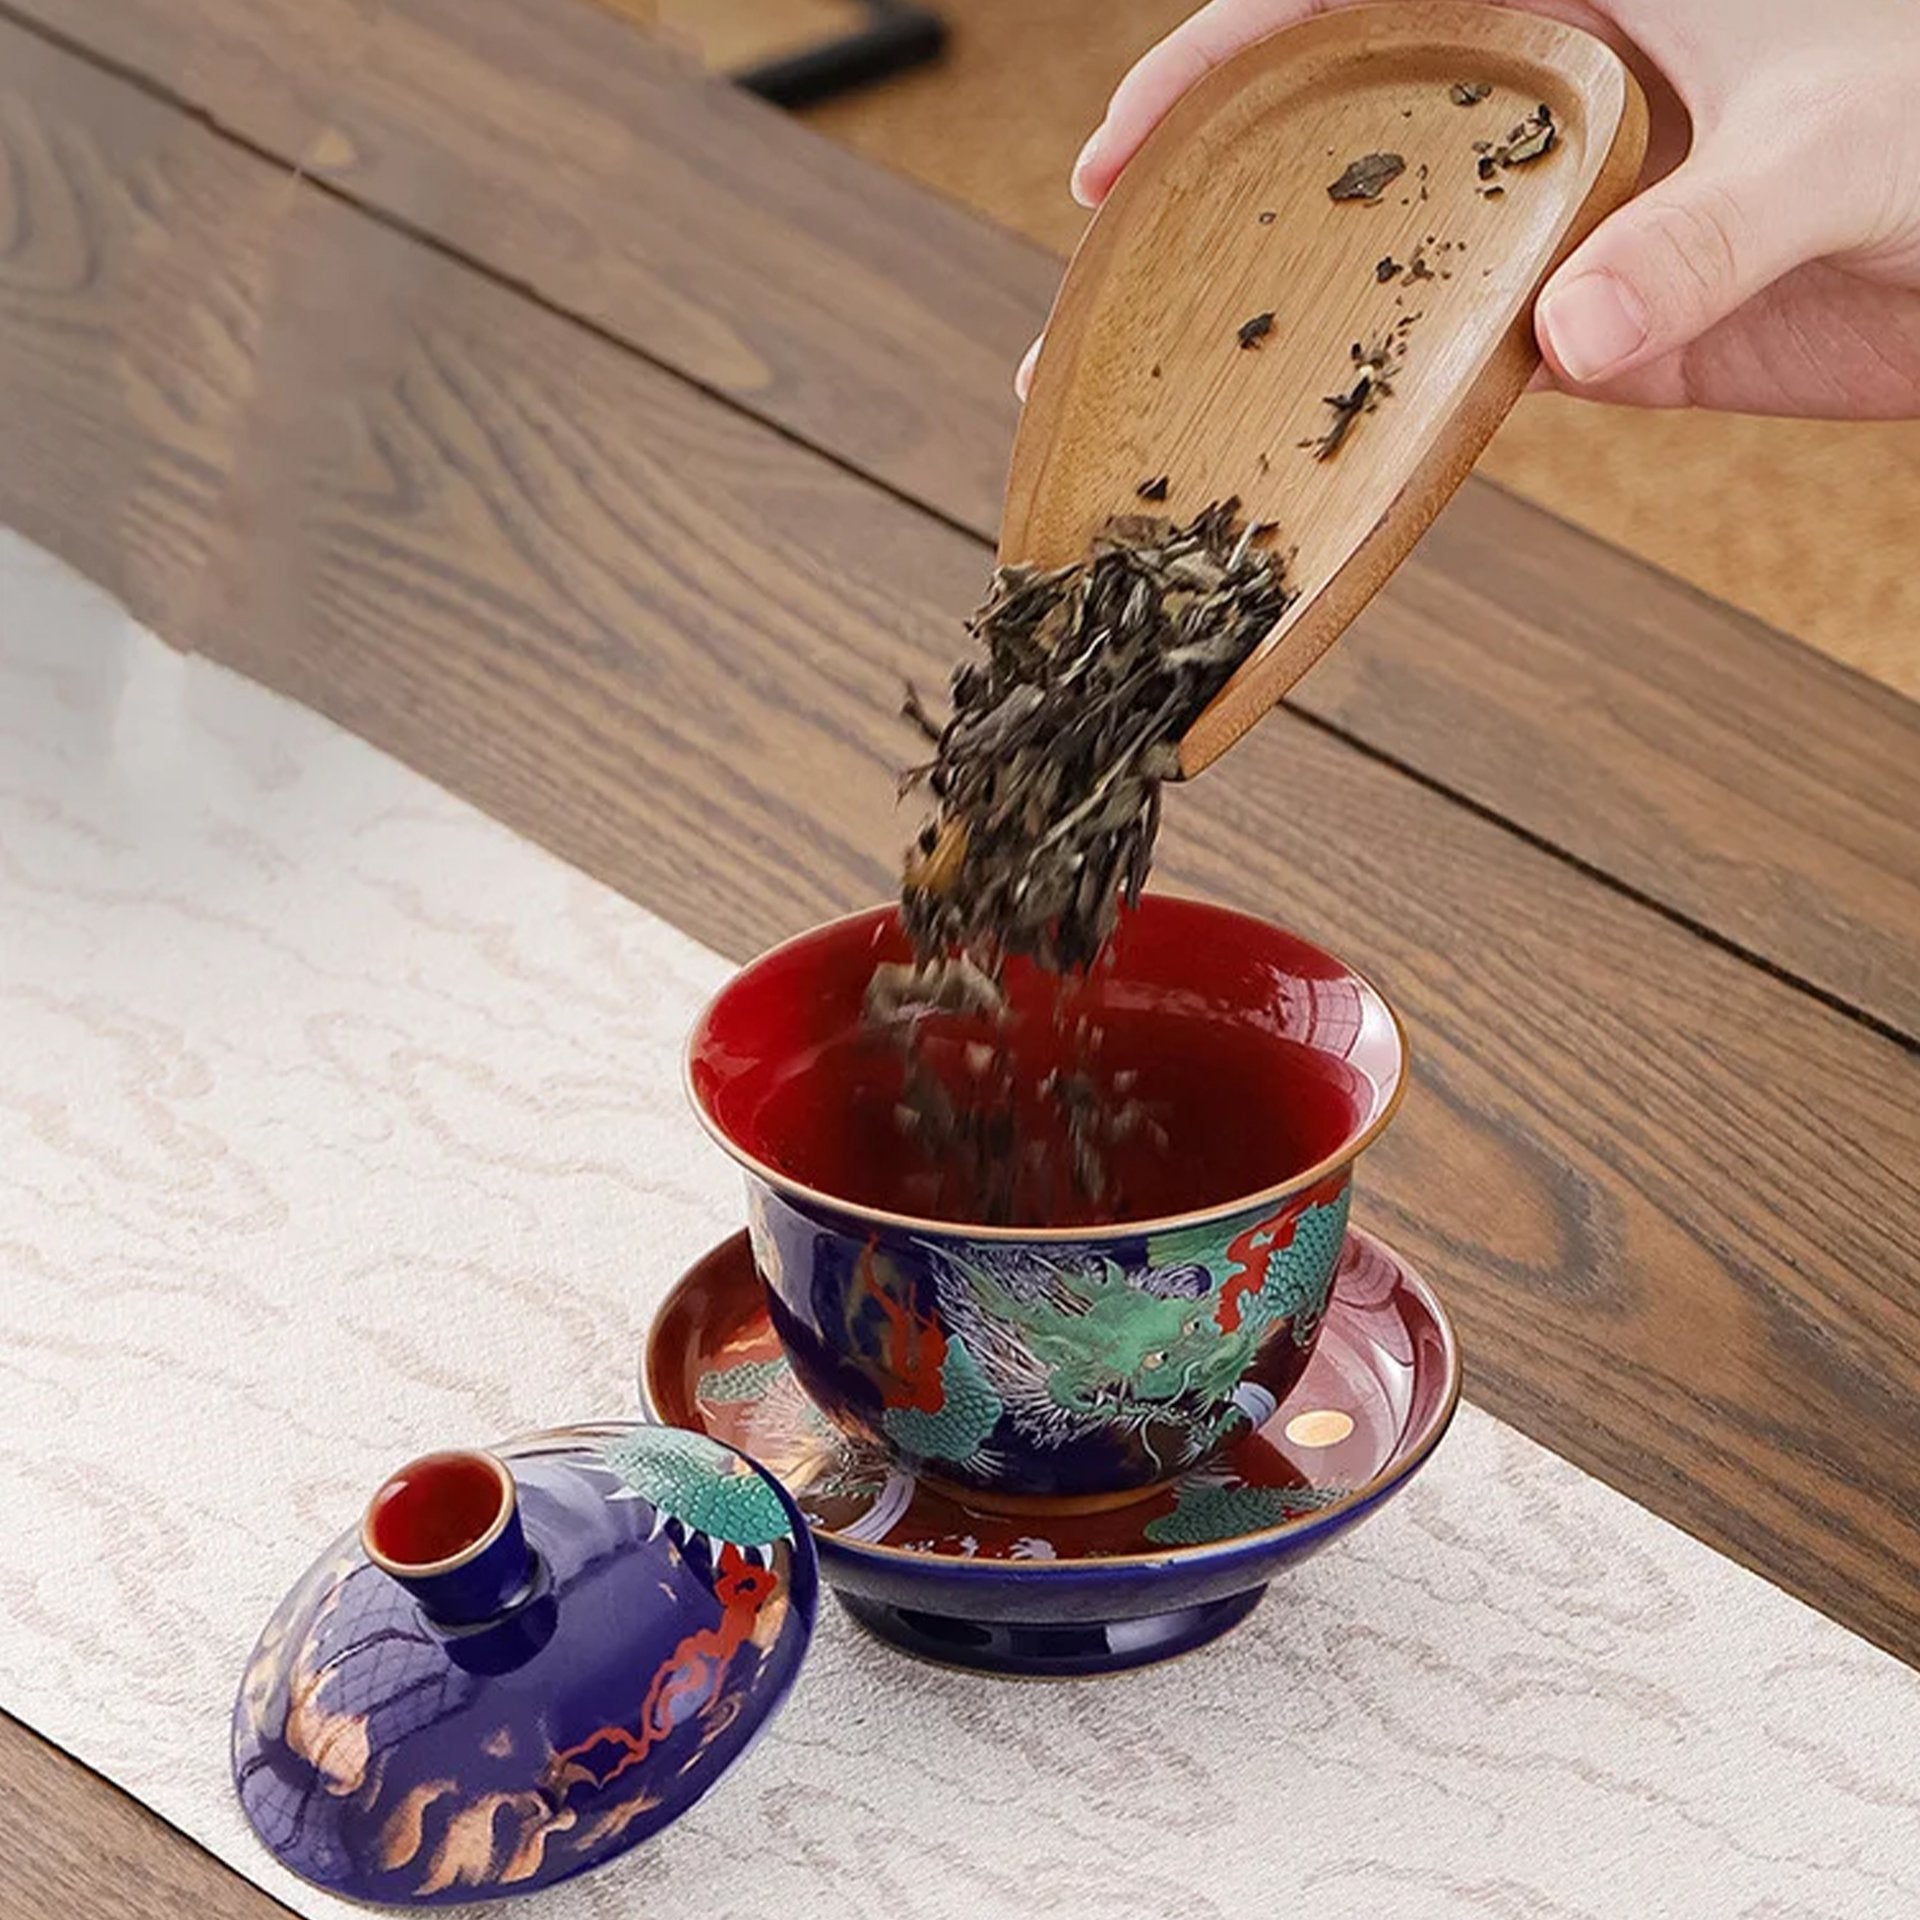 Loose tea being poured into a dragon gaiwan.